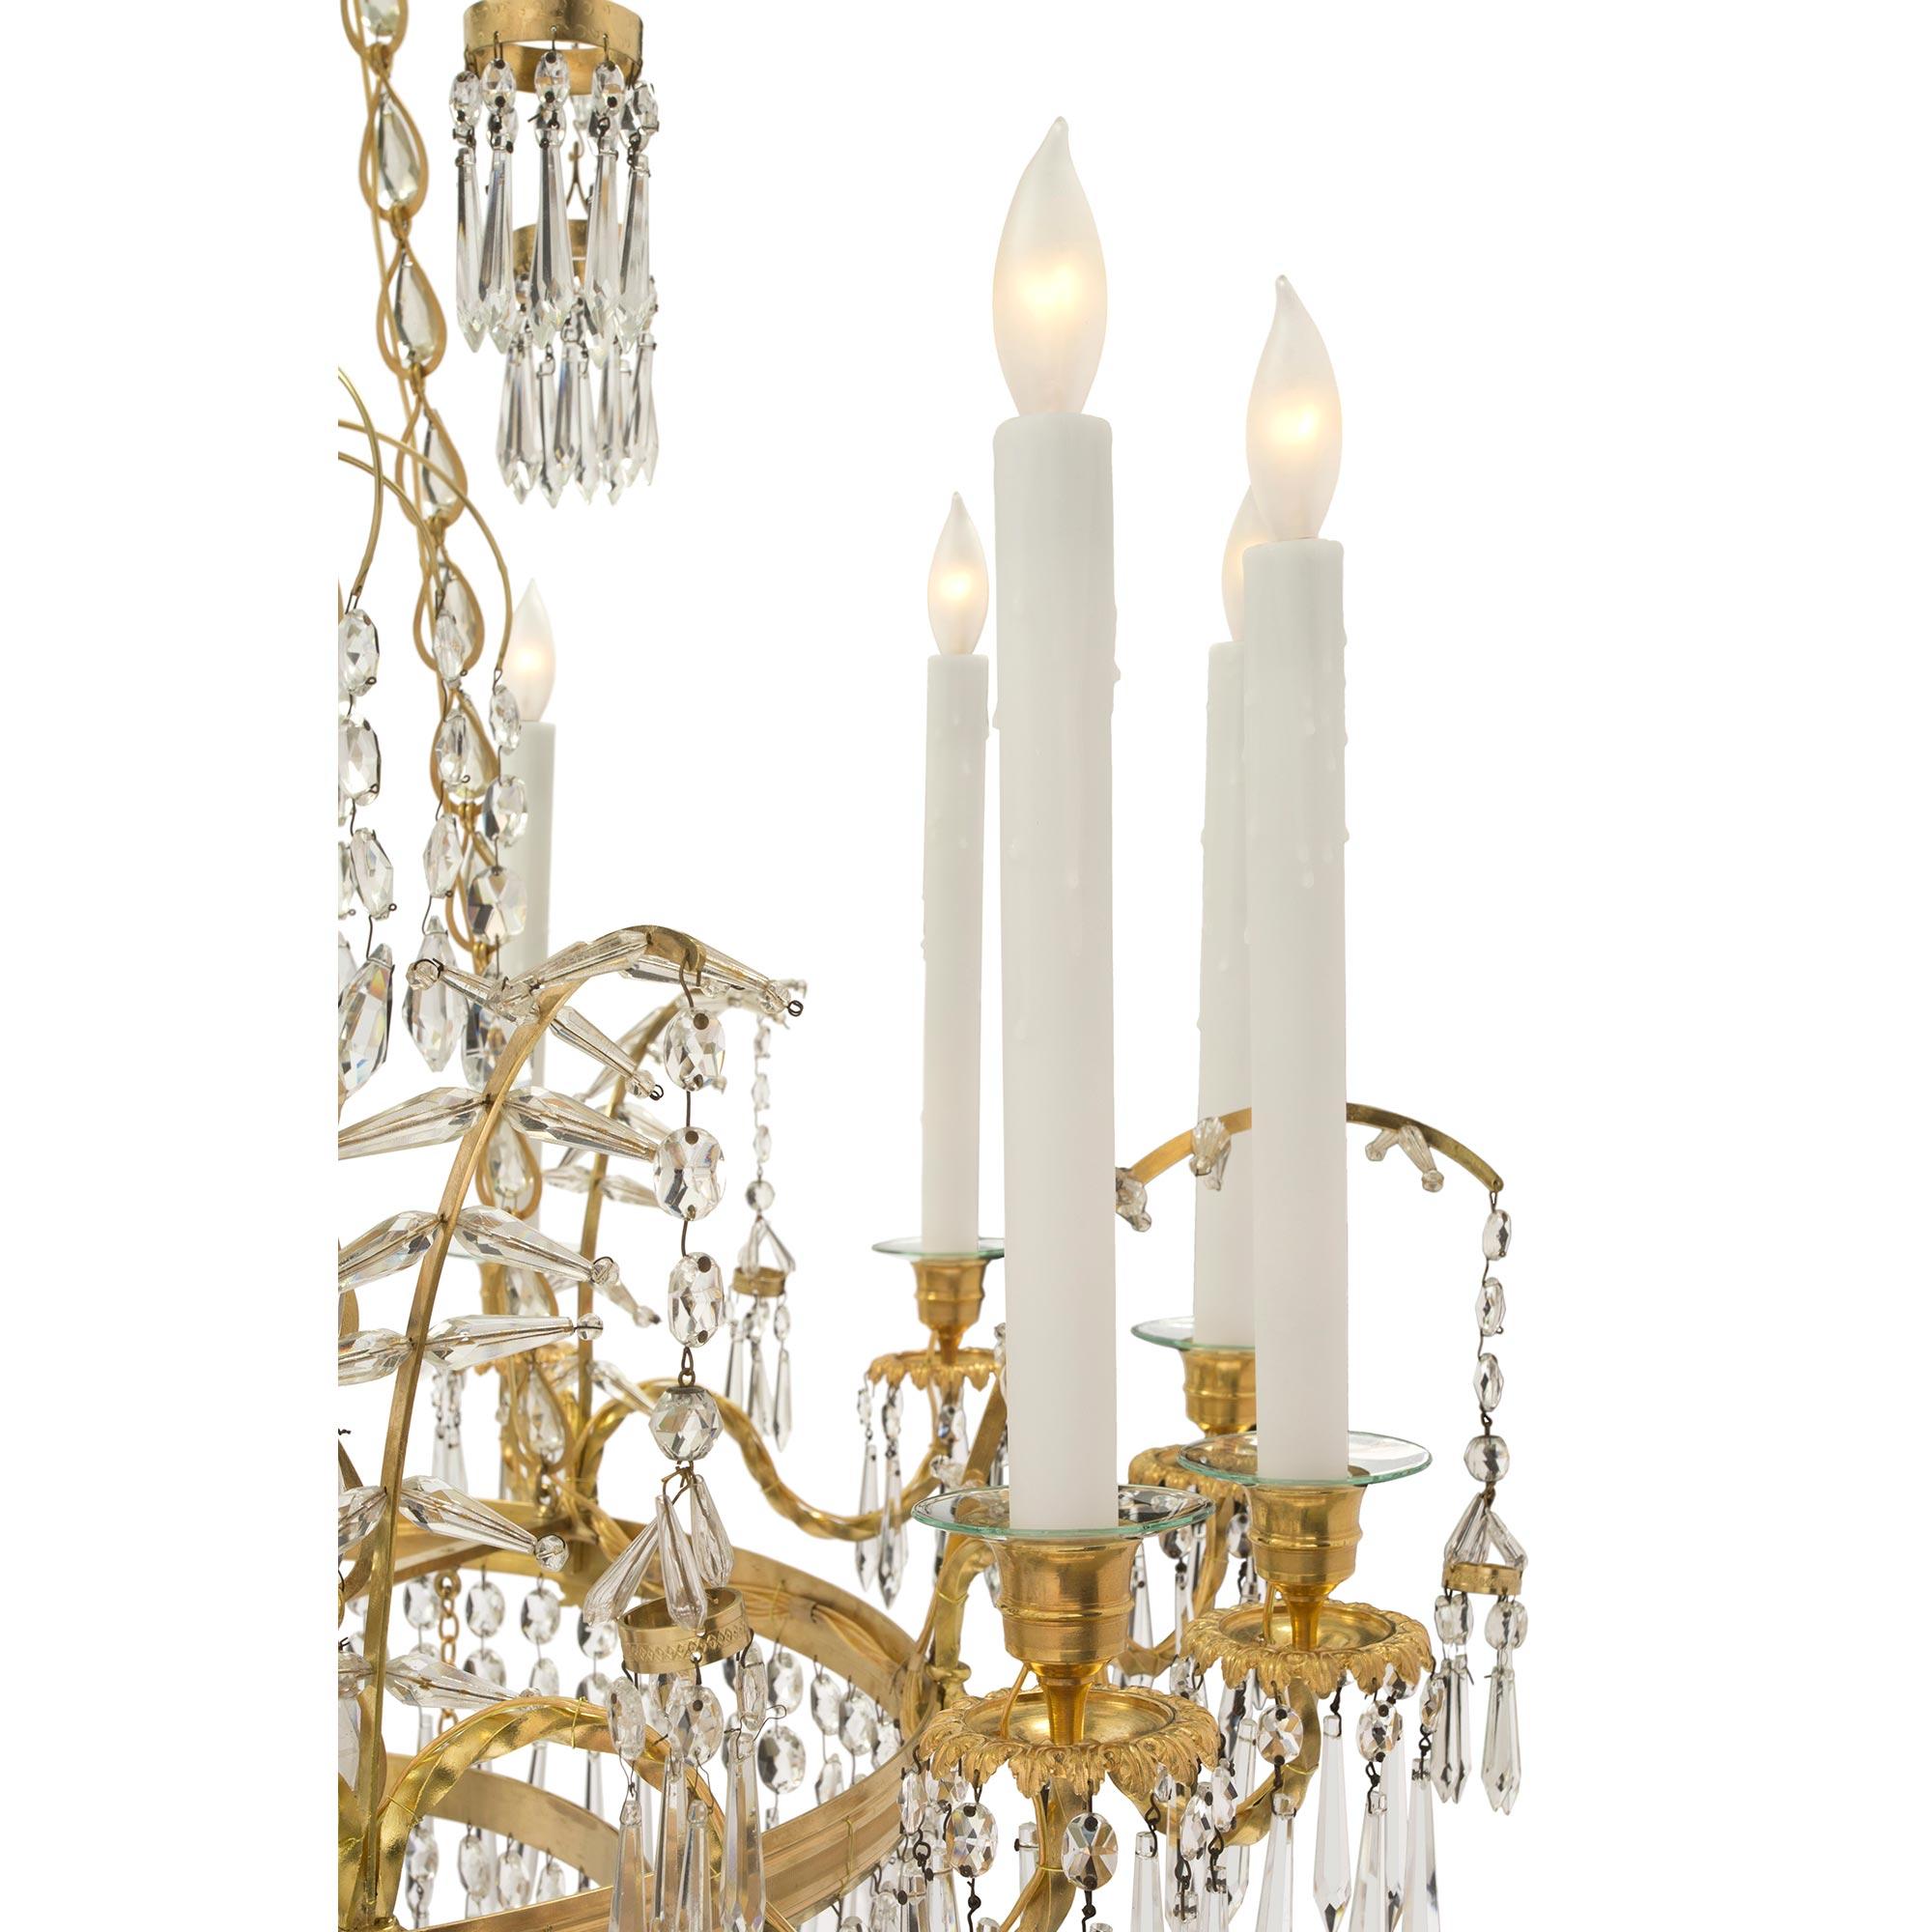 Russian 19th Century Neoclassical Style Glass, Crystal and Ormolu Chandelier For Sale 2